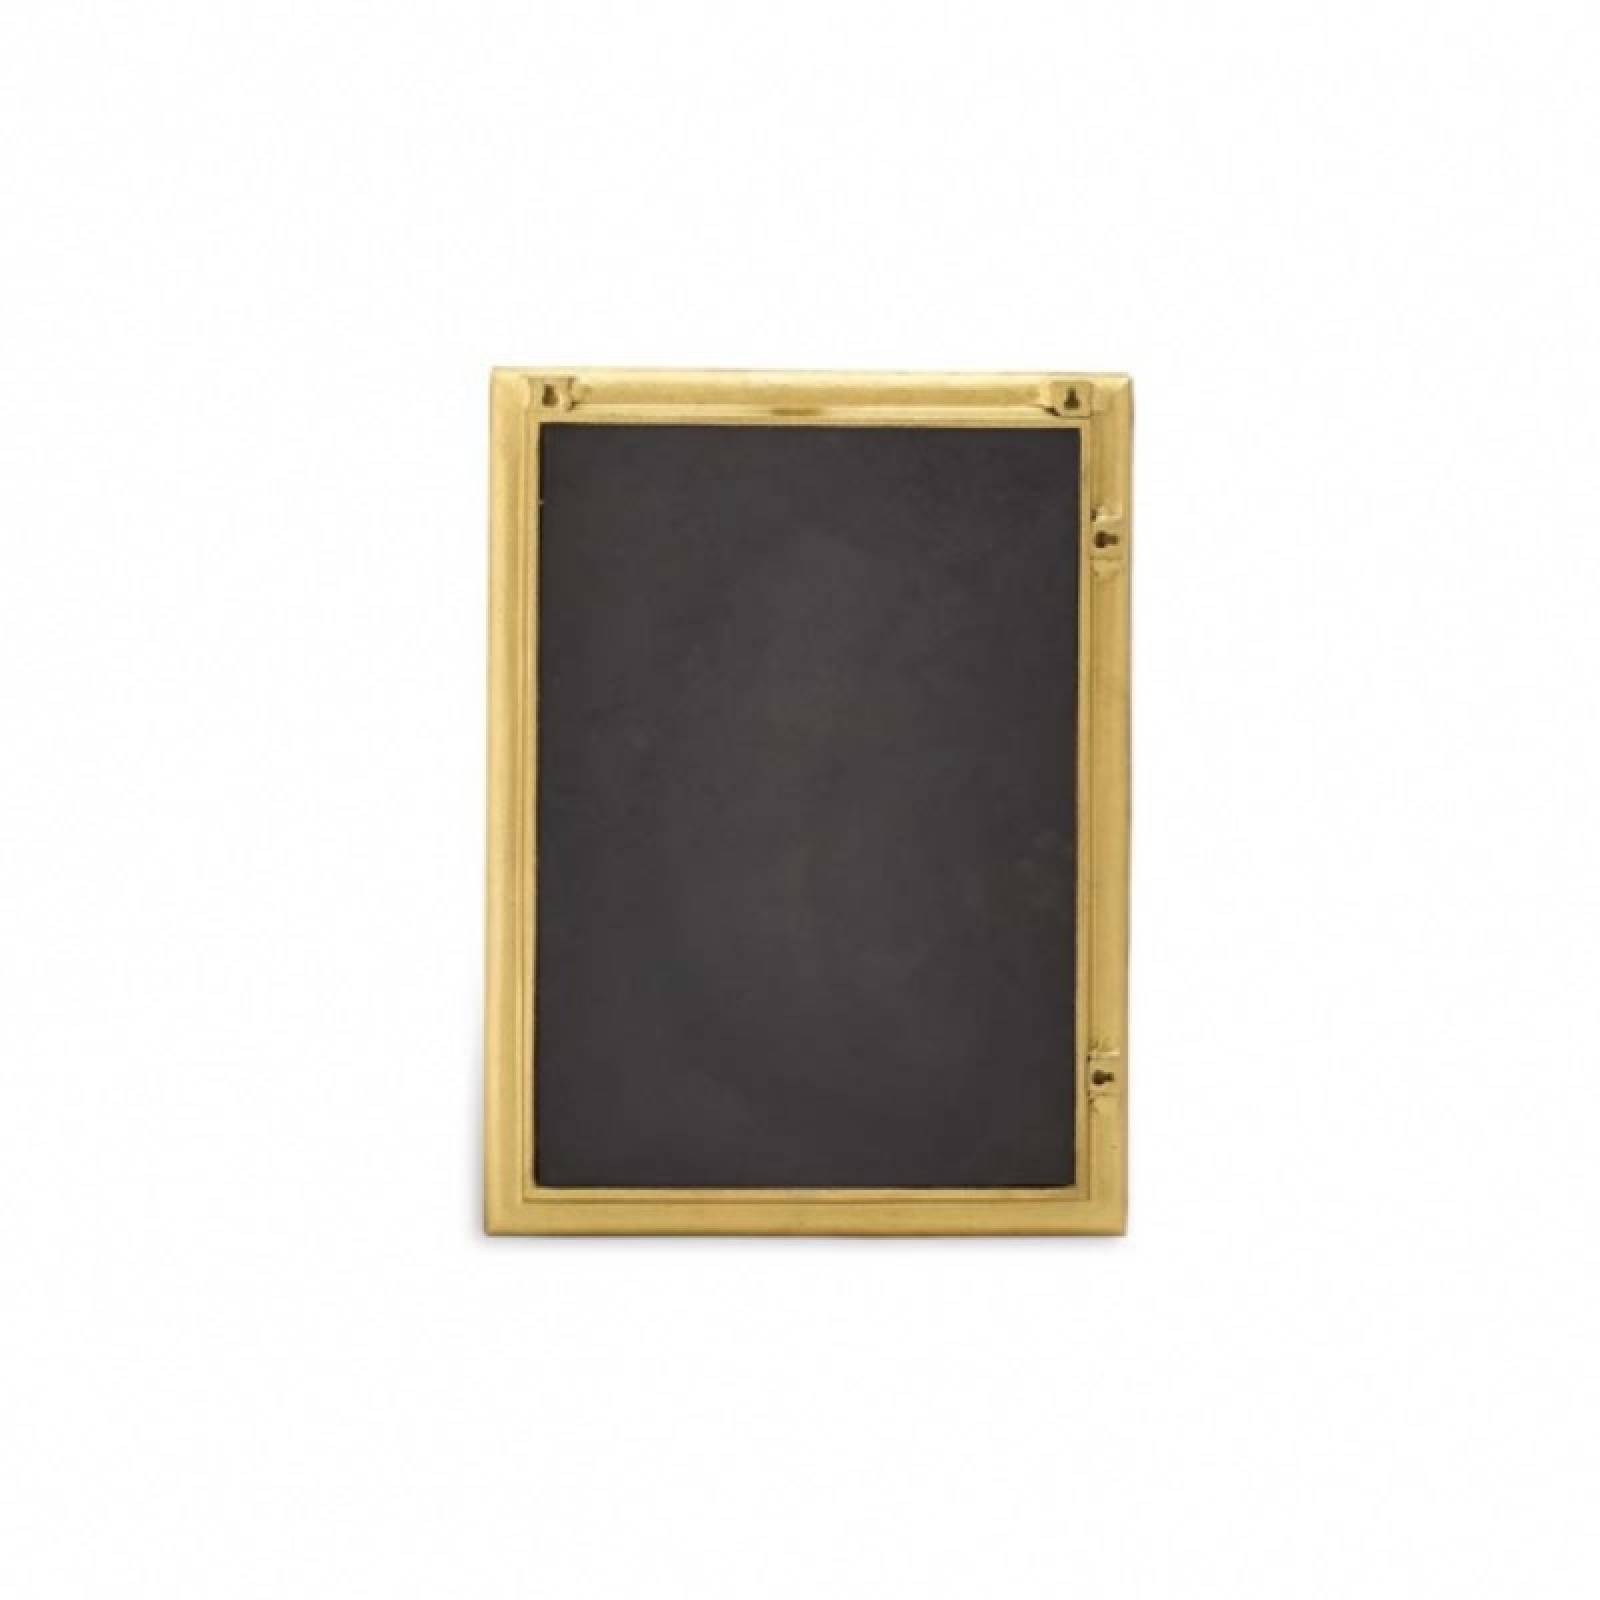 Rectangular Mirror With Curved Antiqued Frame 61x45cm thumbnails